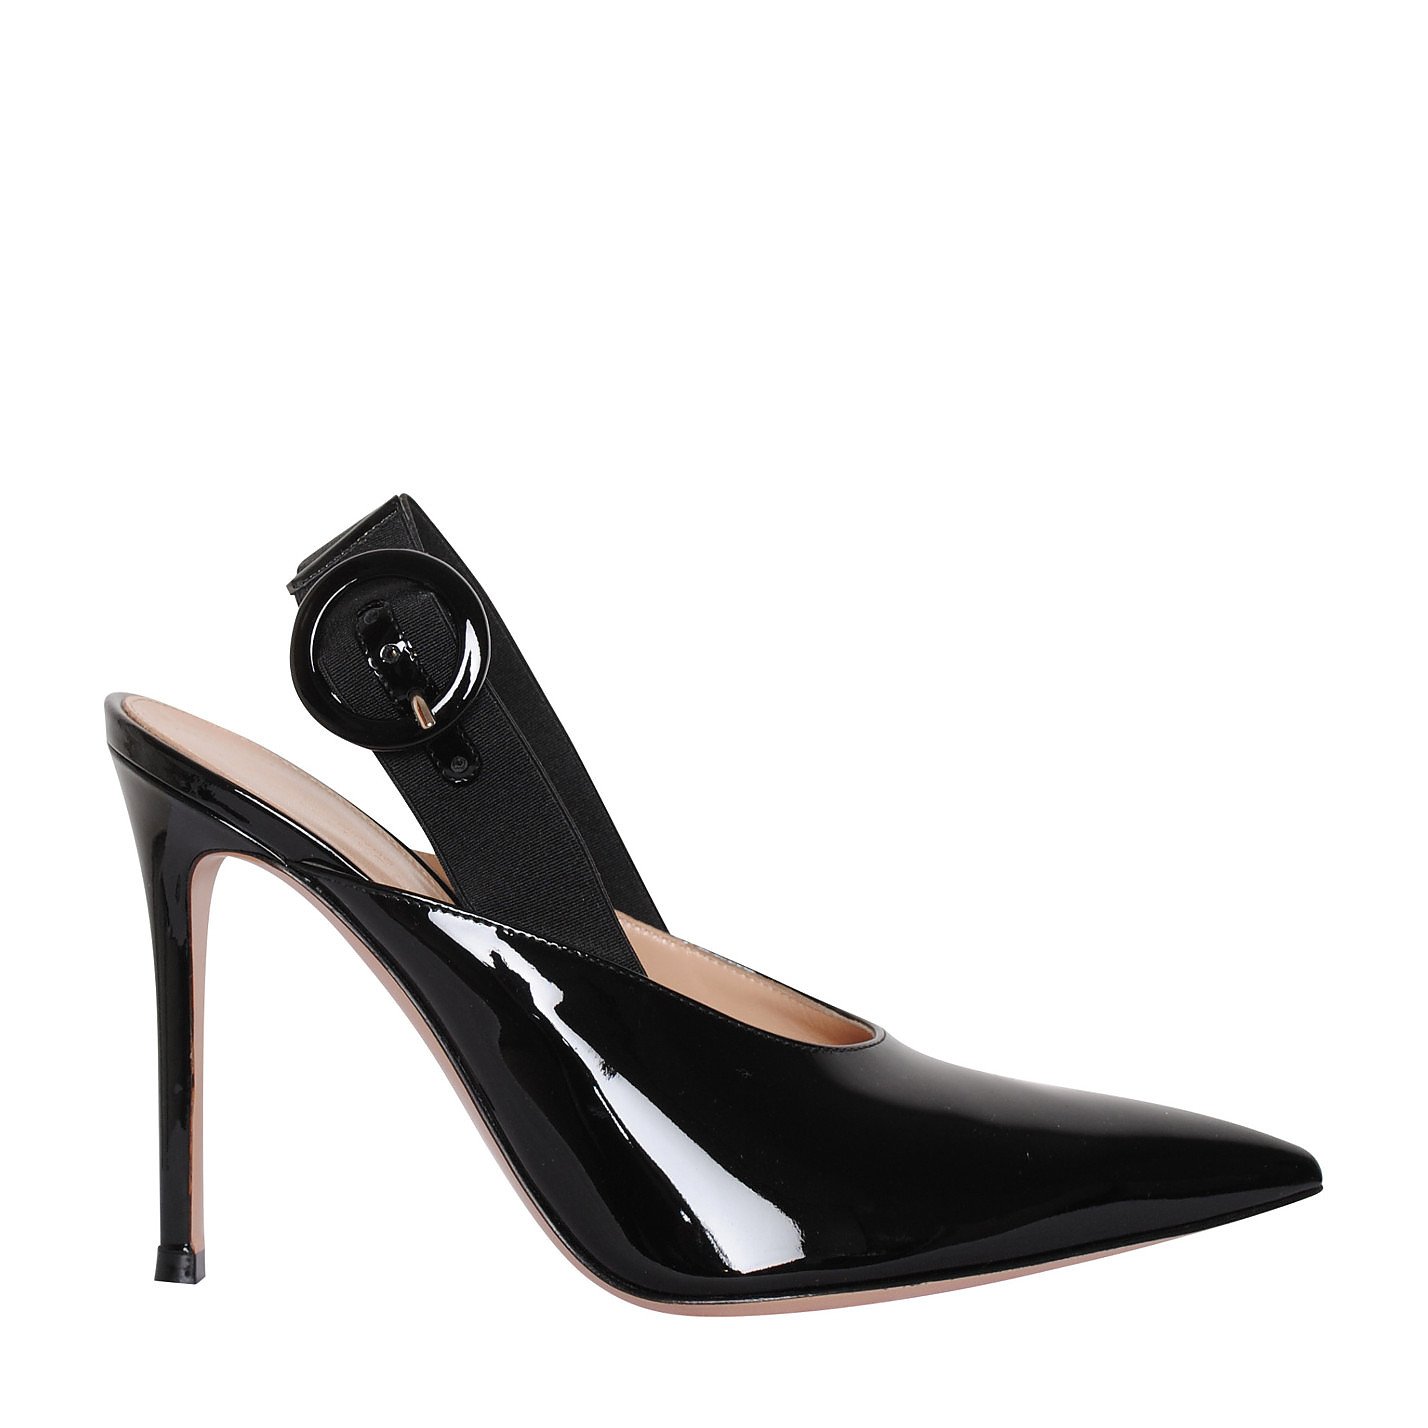 GIANVITO ROSSI Patent Leather Slingback Pumps